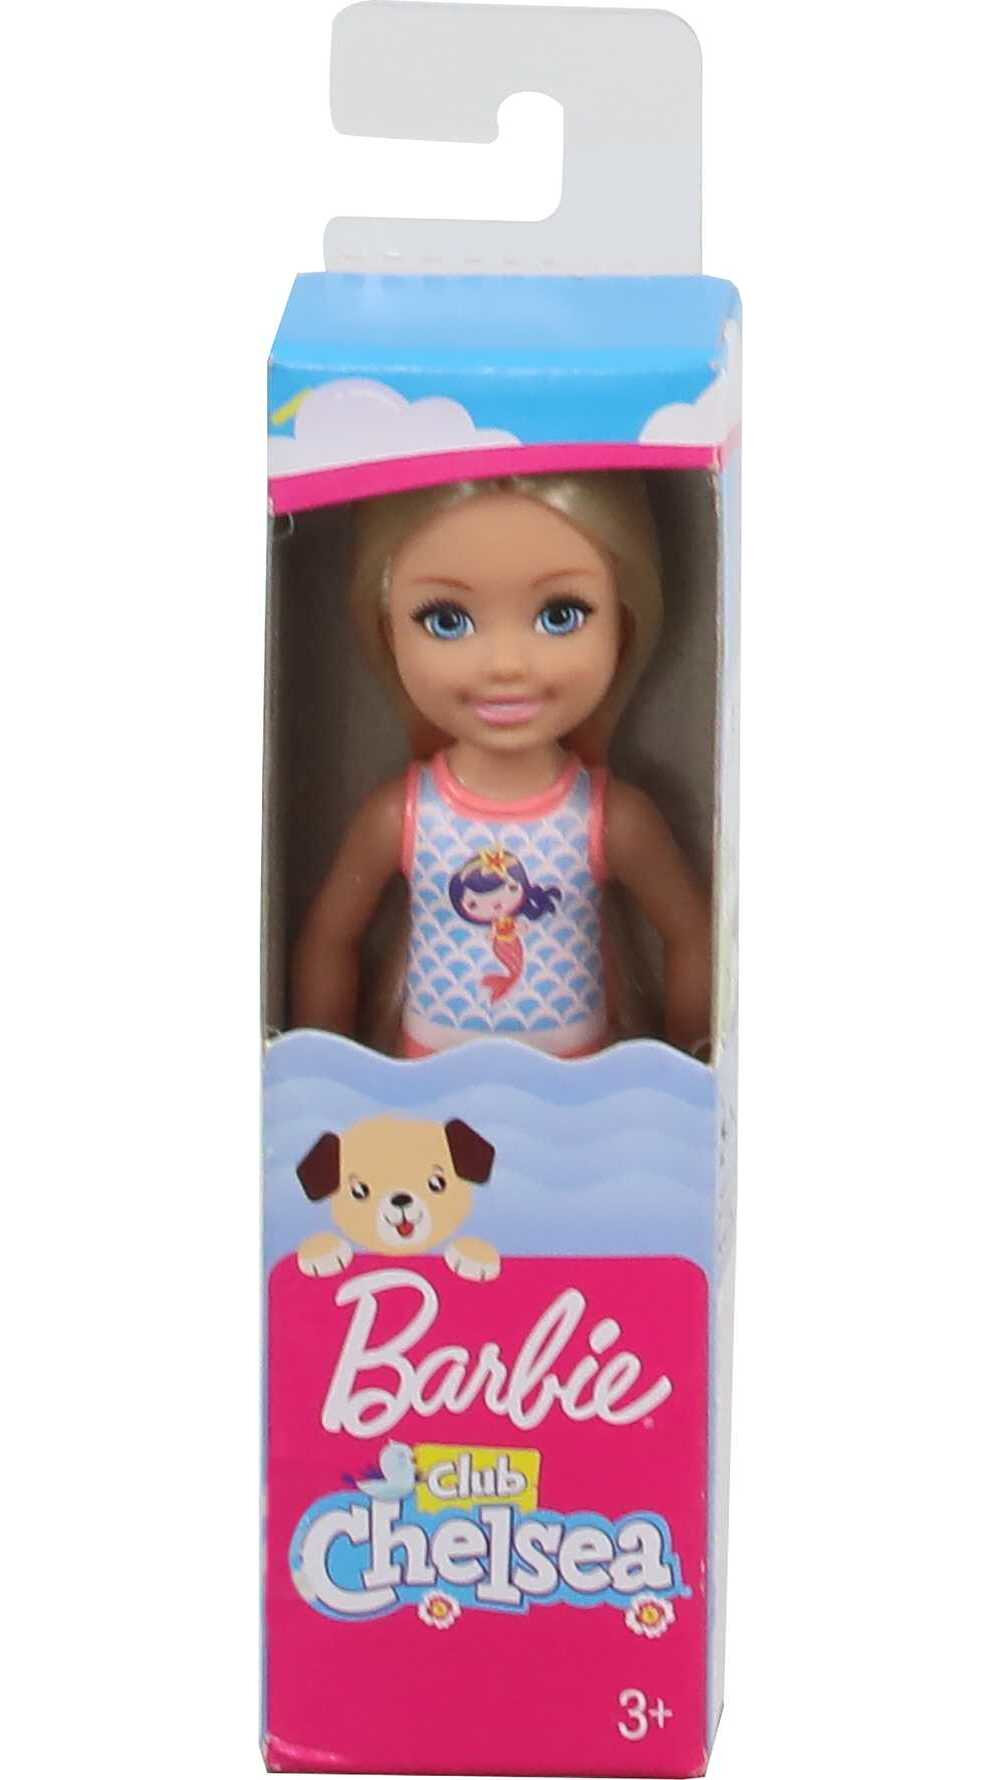 Barbie Club Chelsea Doll, Small Doll with Long Blonde Hair, Blue Eyes & Mermaid-Graphic Swimsuit - image 5 of 5